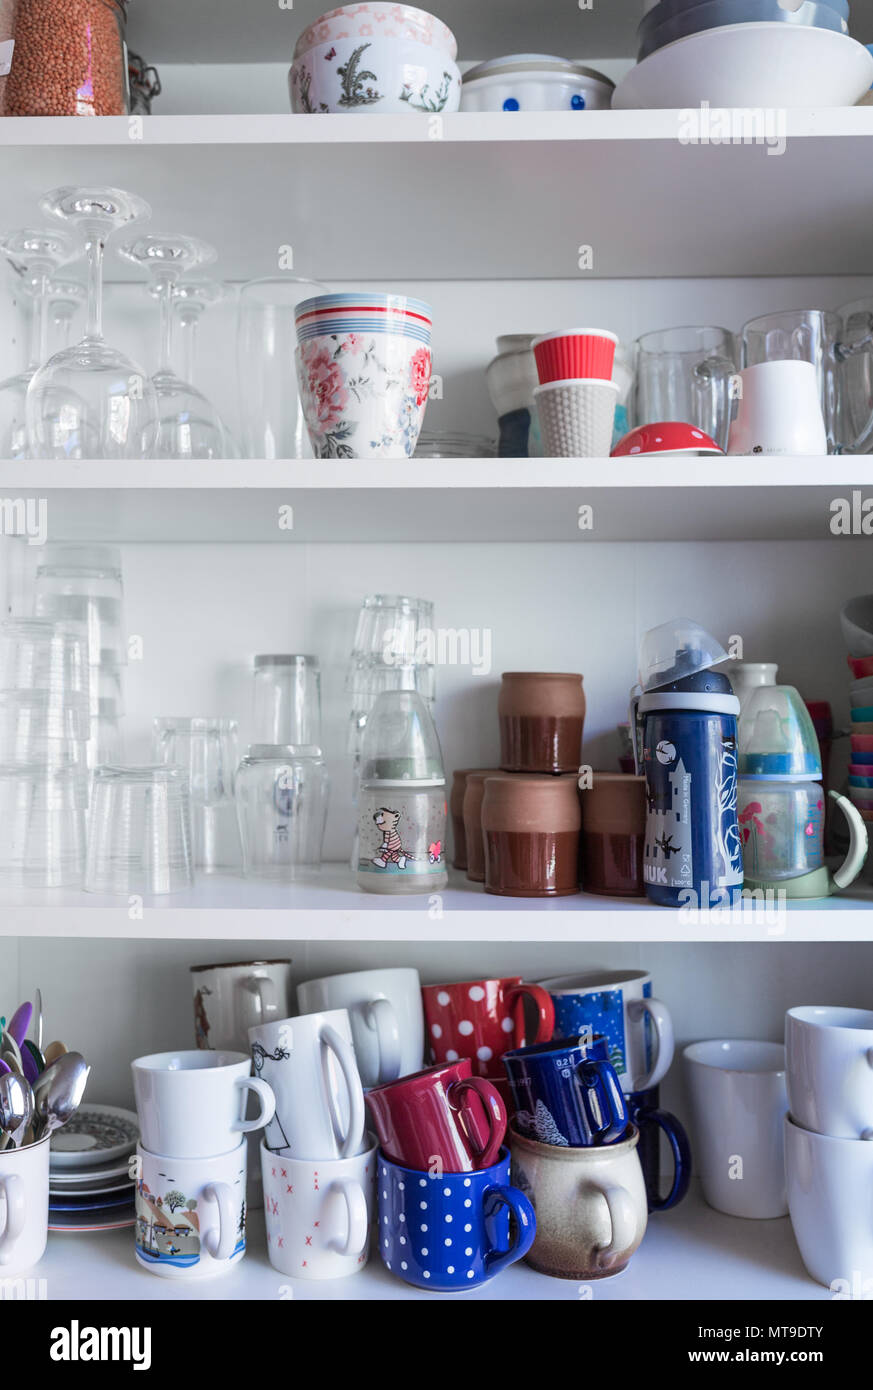 Kitchen cupboard with stacks of mugs and cups. Stock Photo